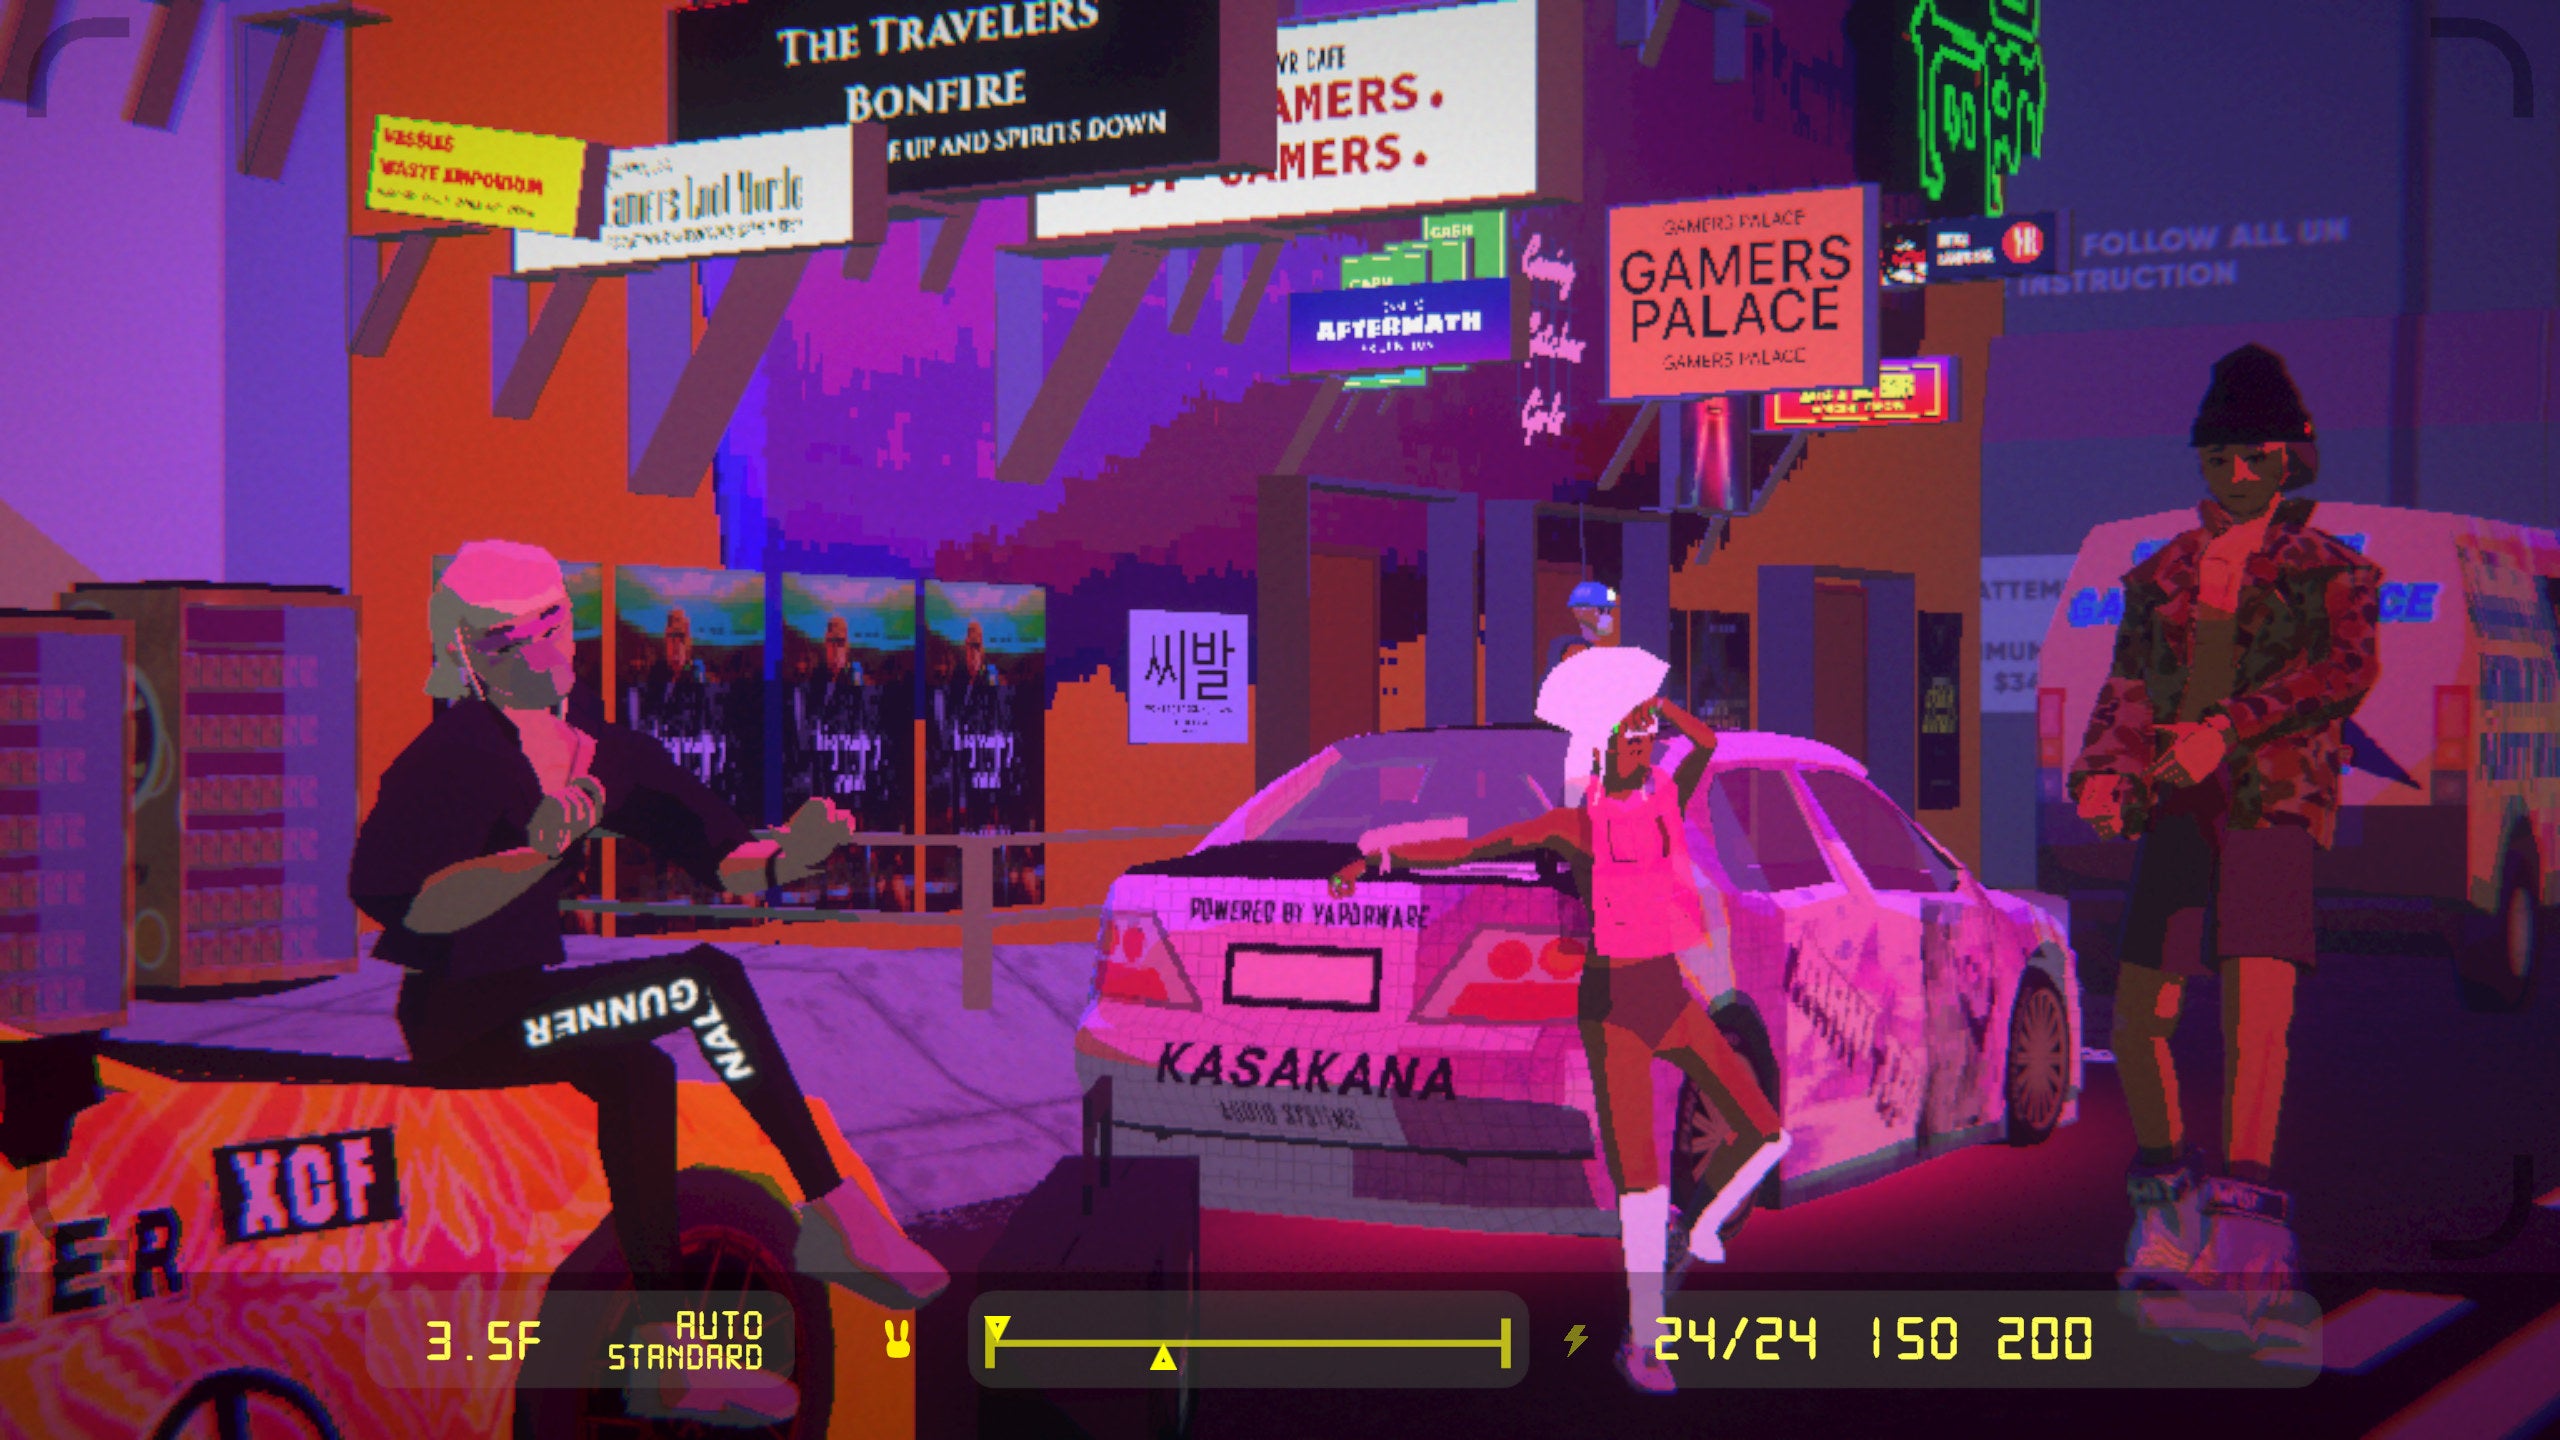 Photographing a street party in an Umurangi Generation screenshot.